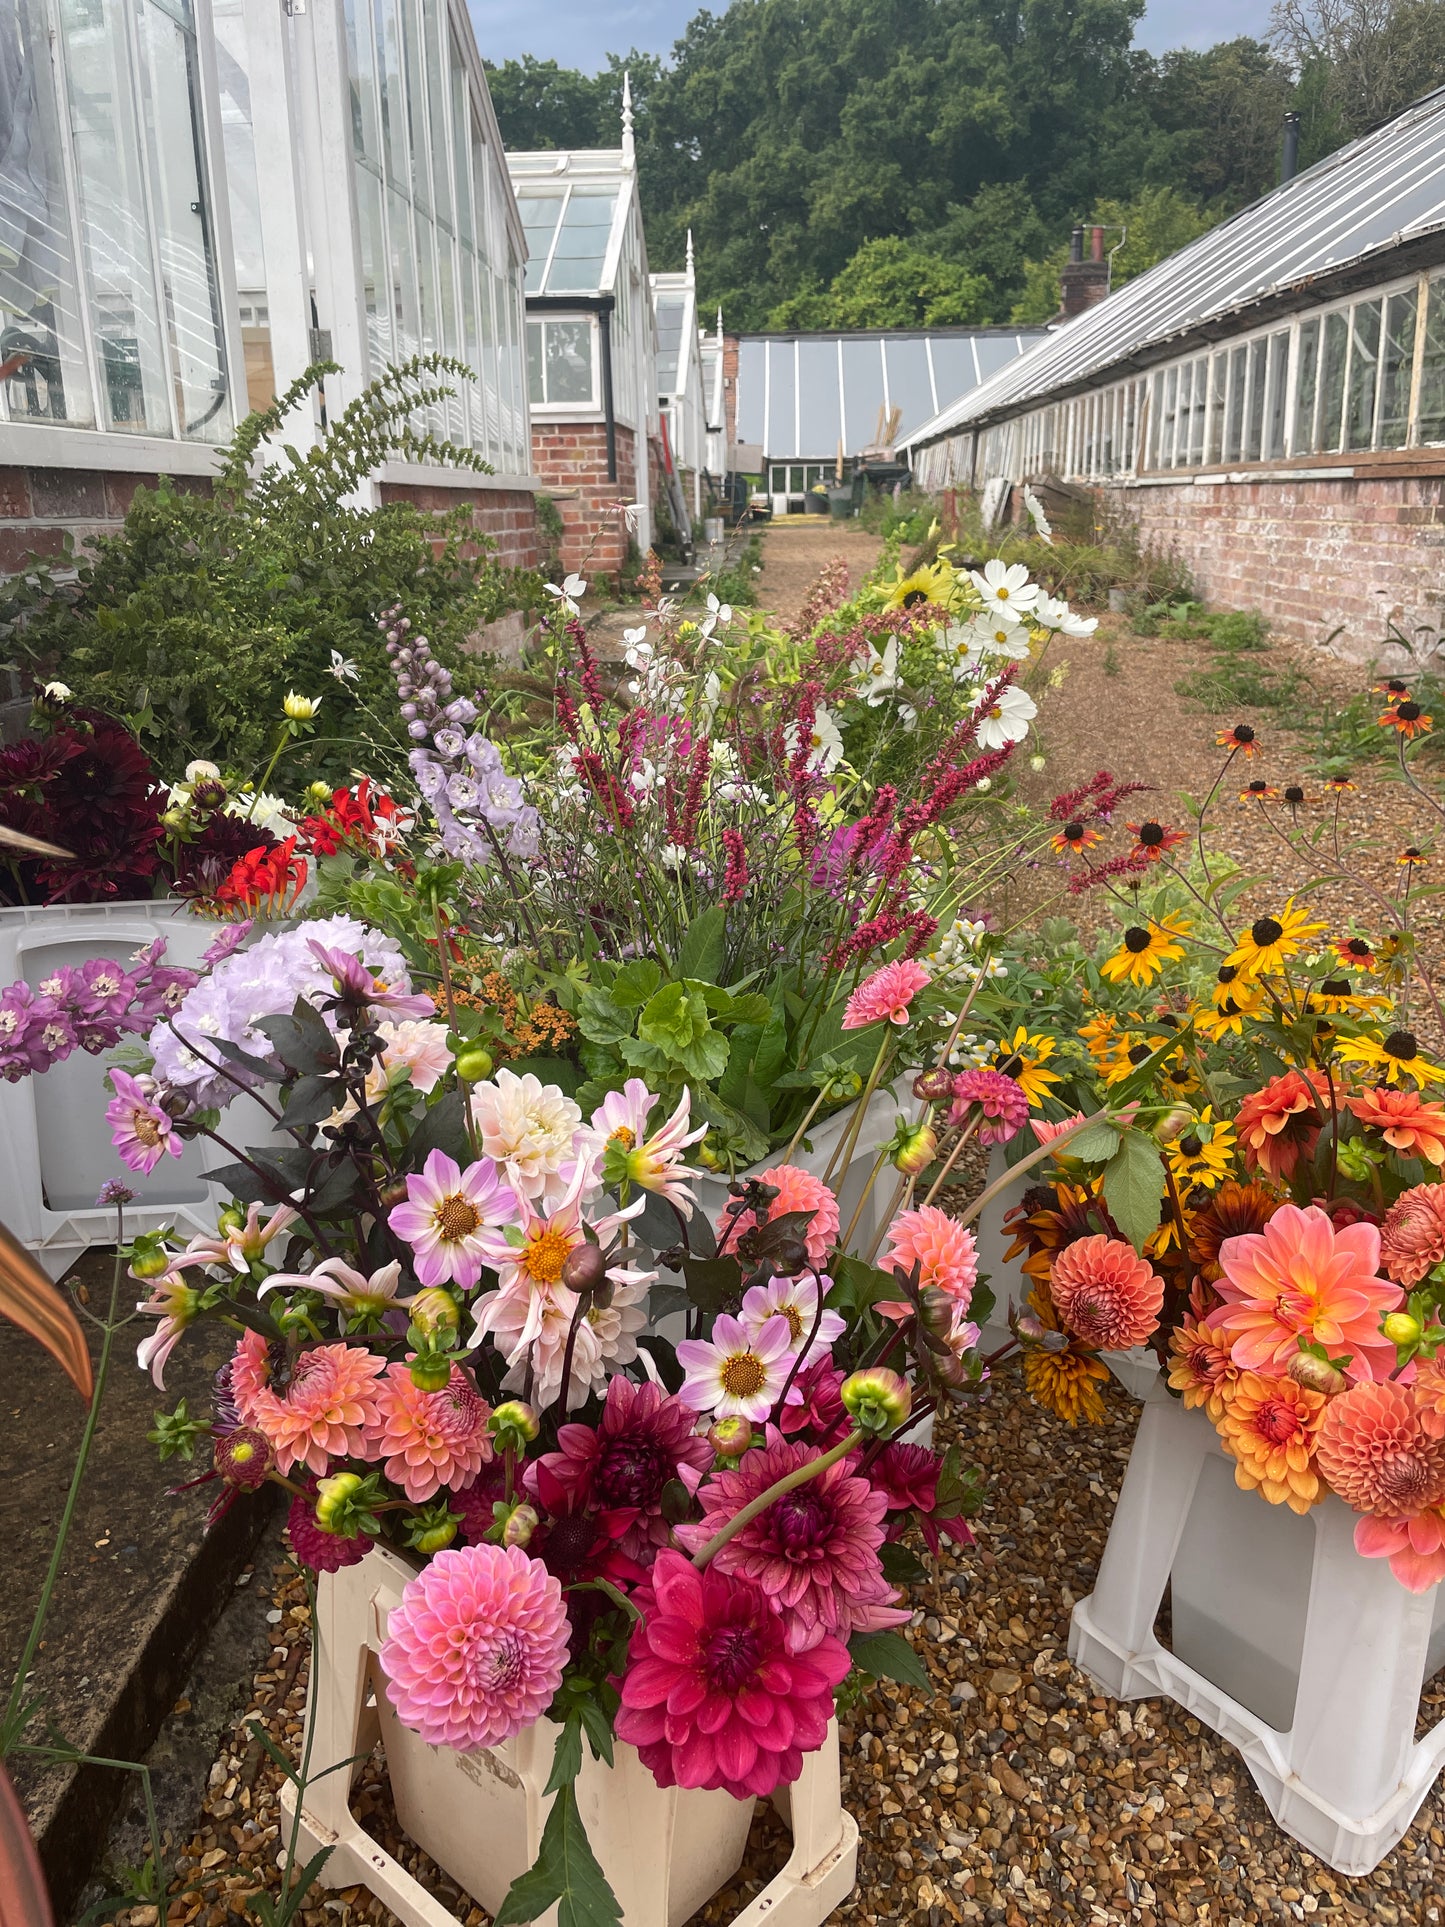 The Cutting Garden, Season by Season - Late Summer/Early Autumn - 11th September 10am to 4pm